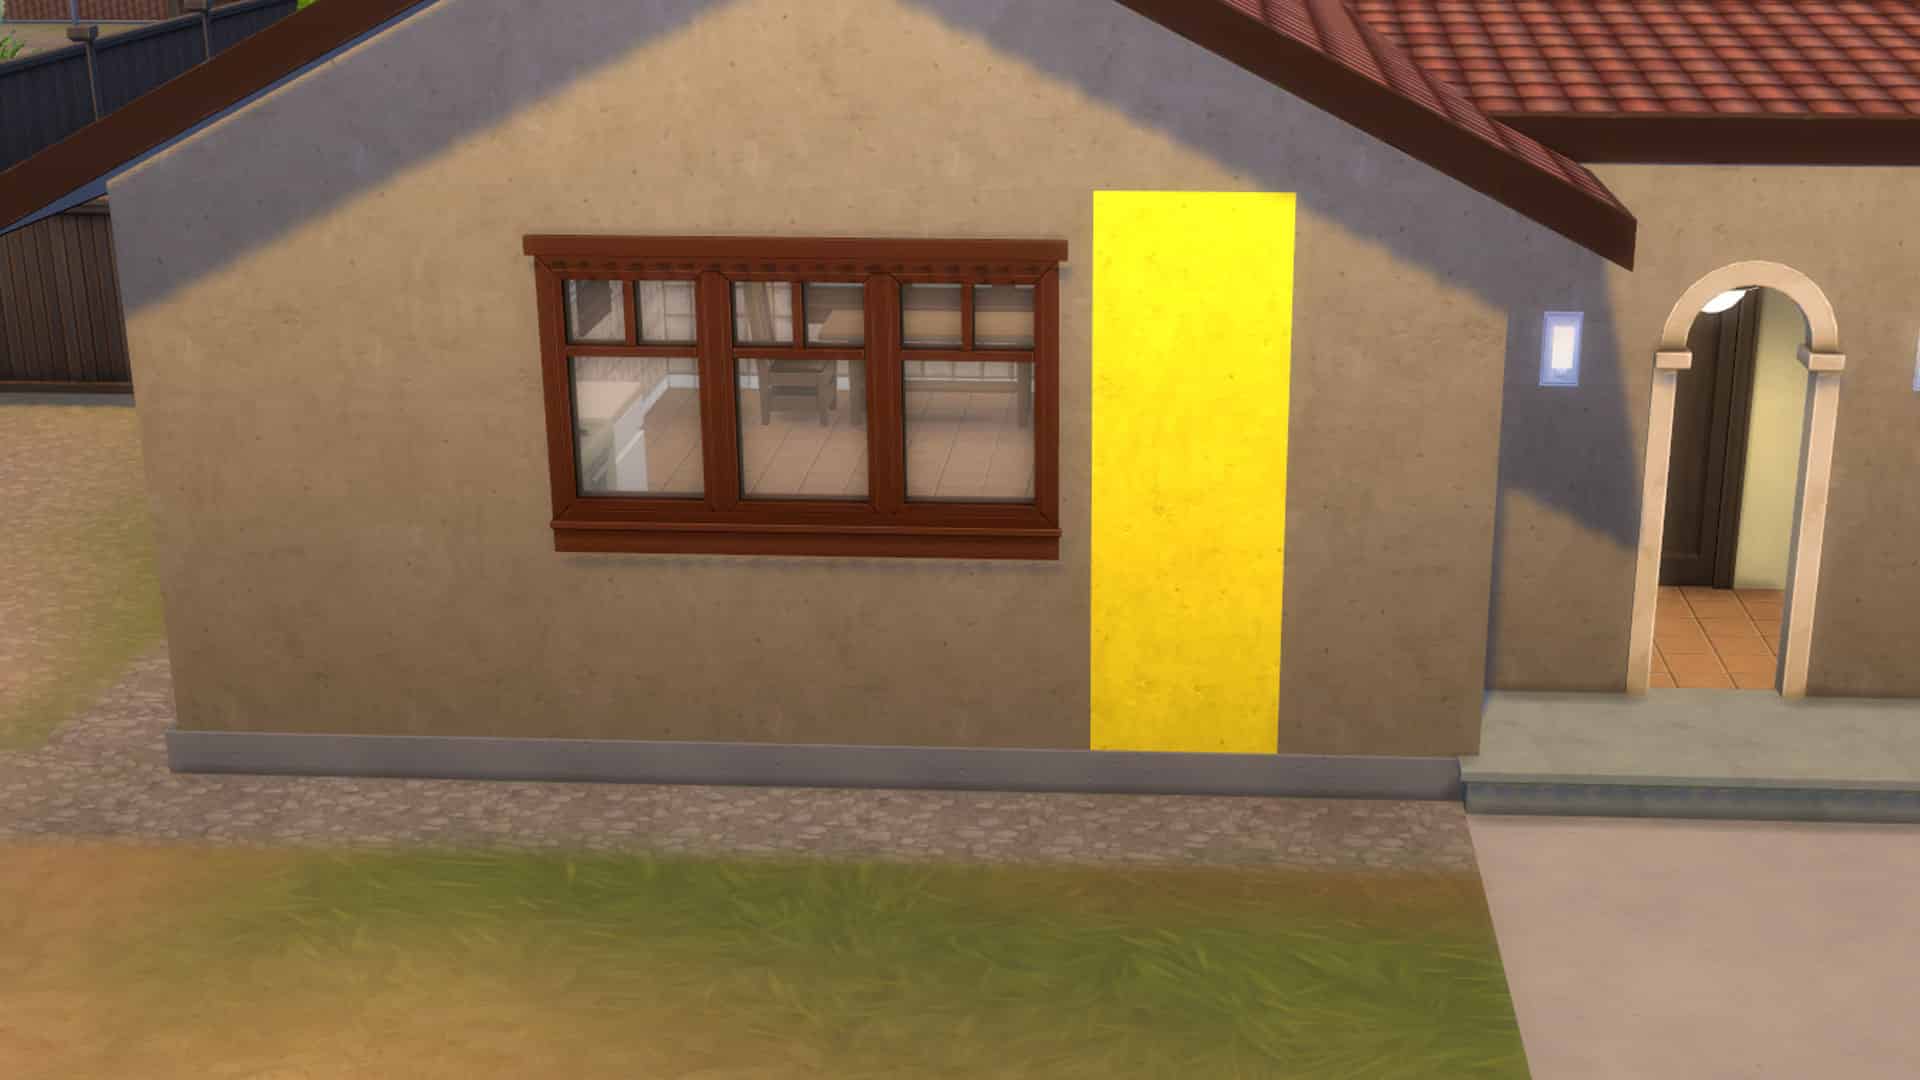 Wall in the sims 4 highlighted for deletion